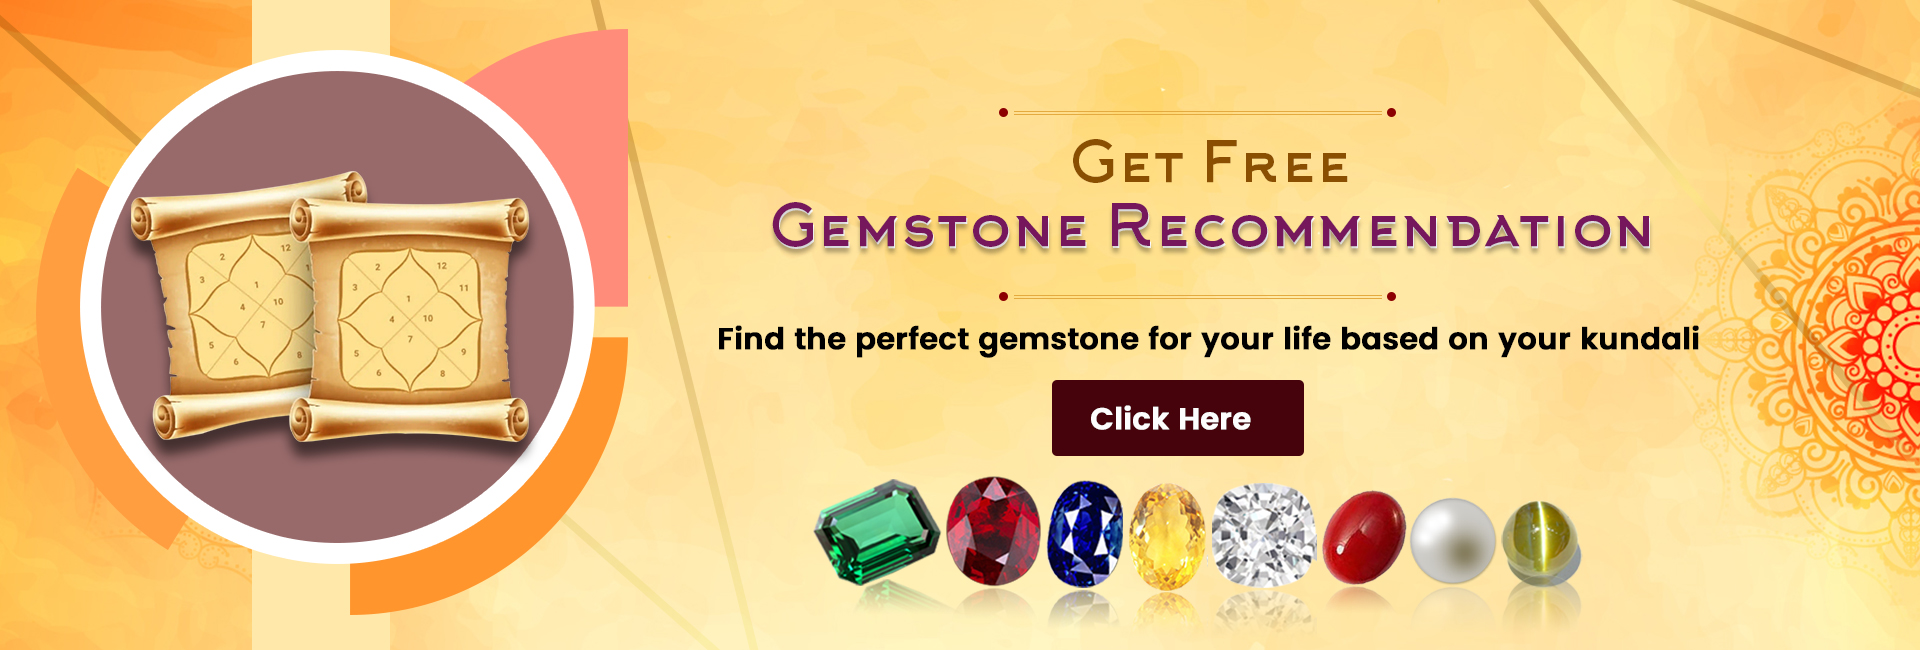 Find the perfect gemstone for your life based on your kundali